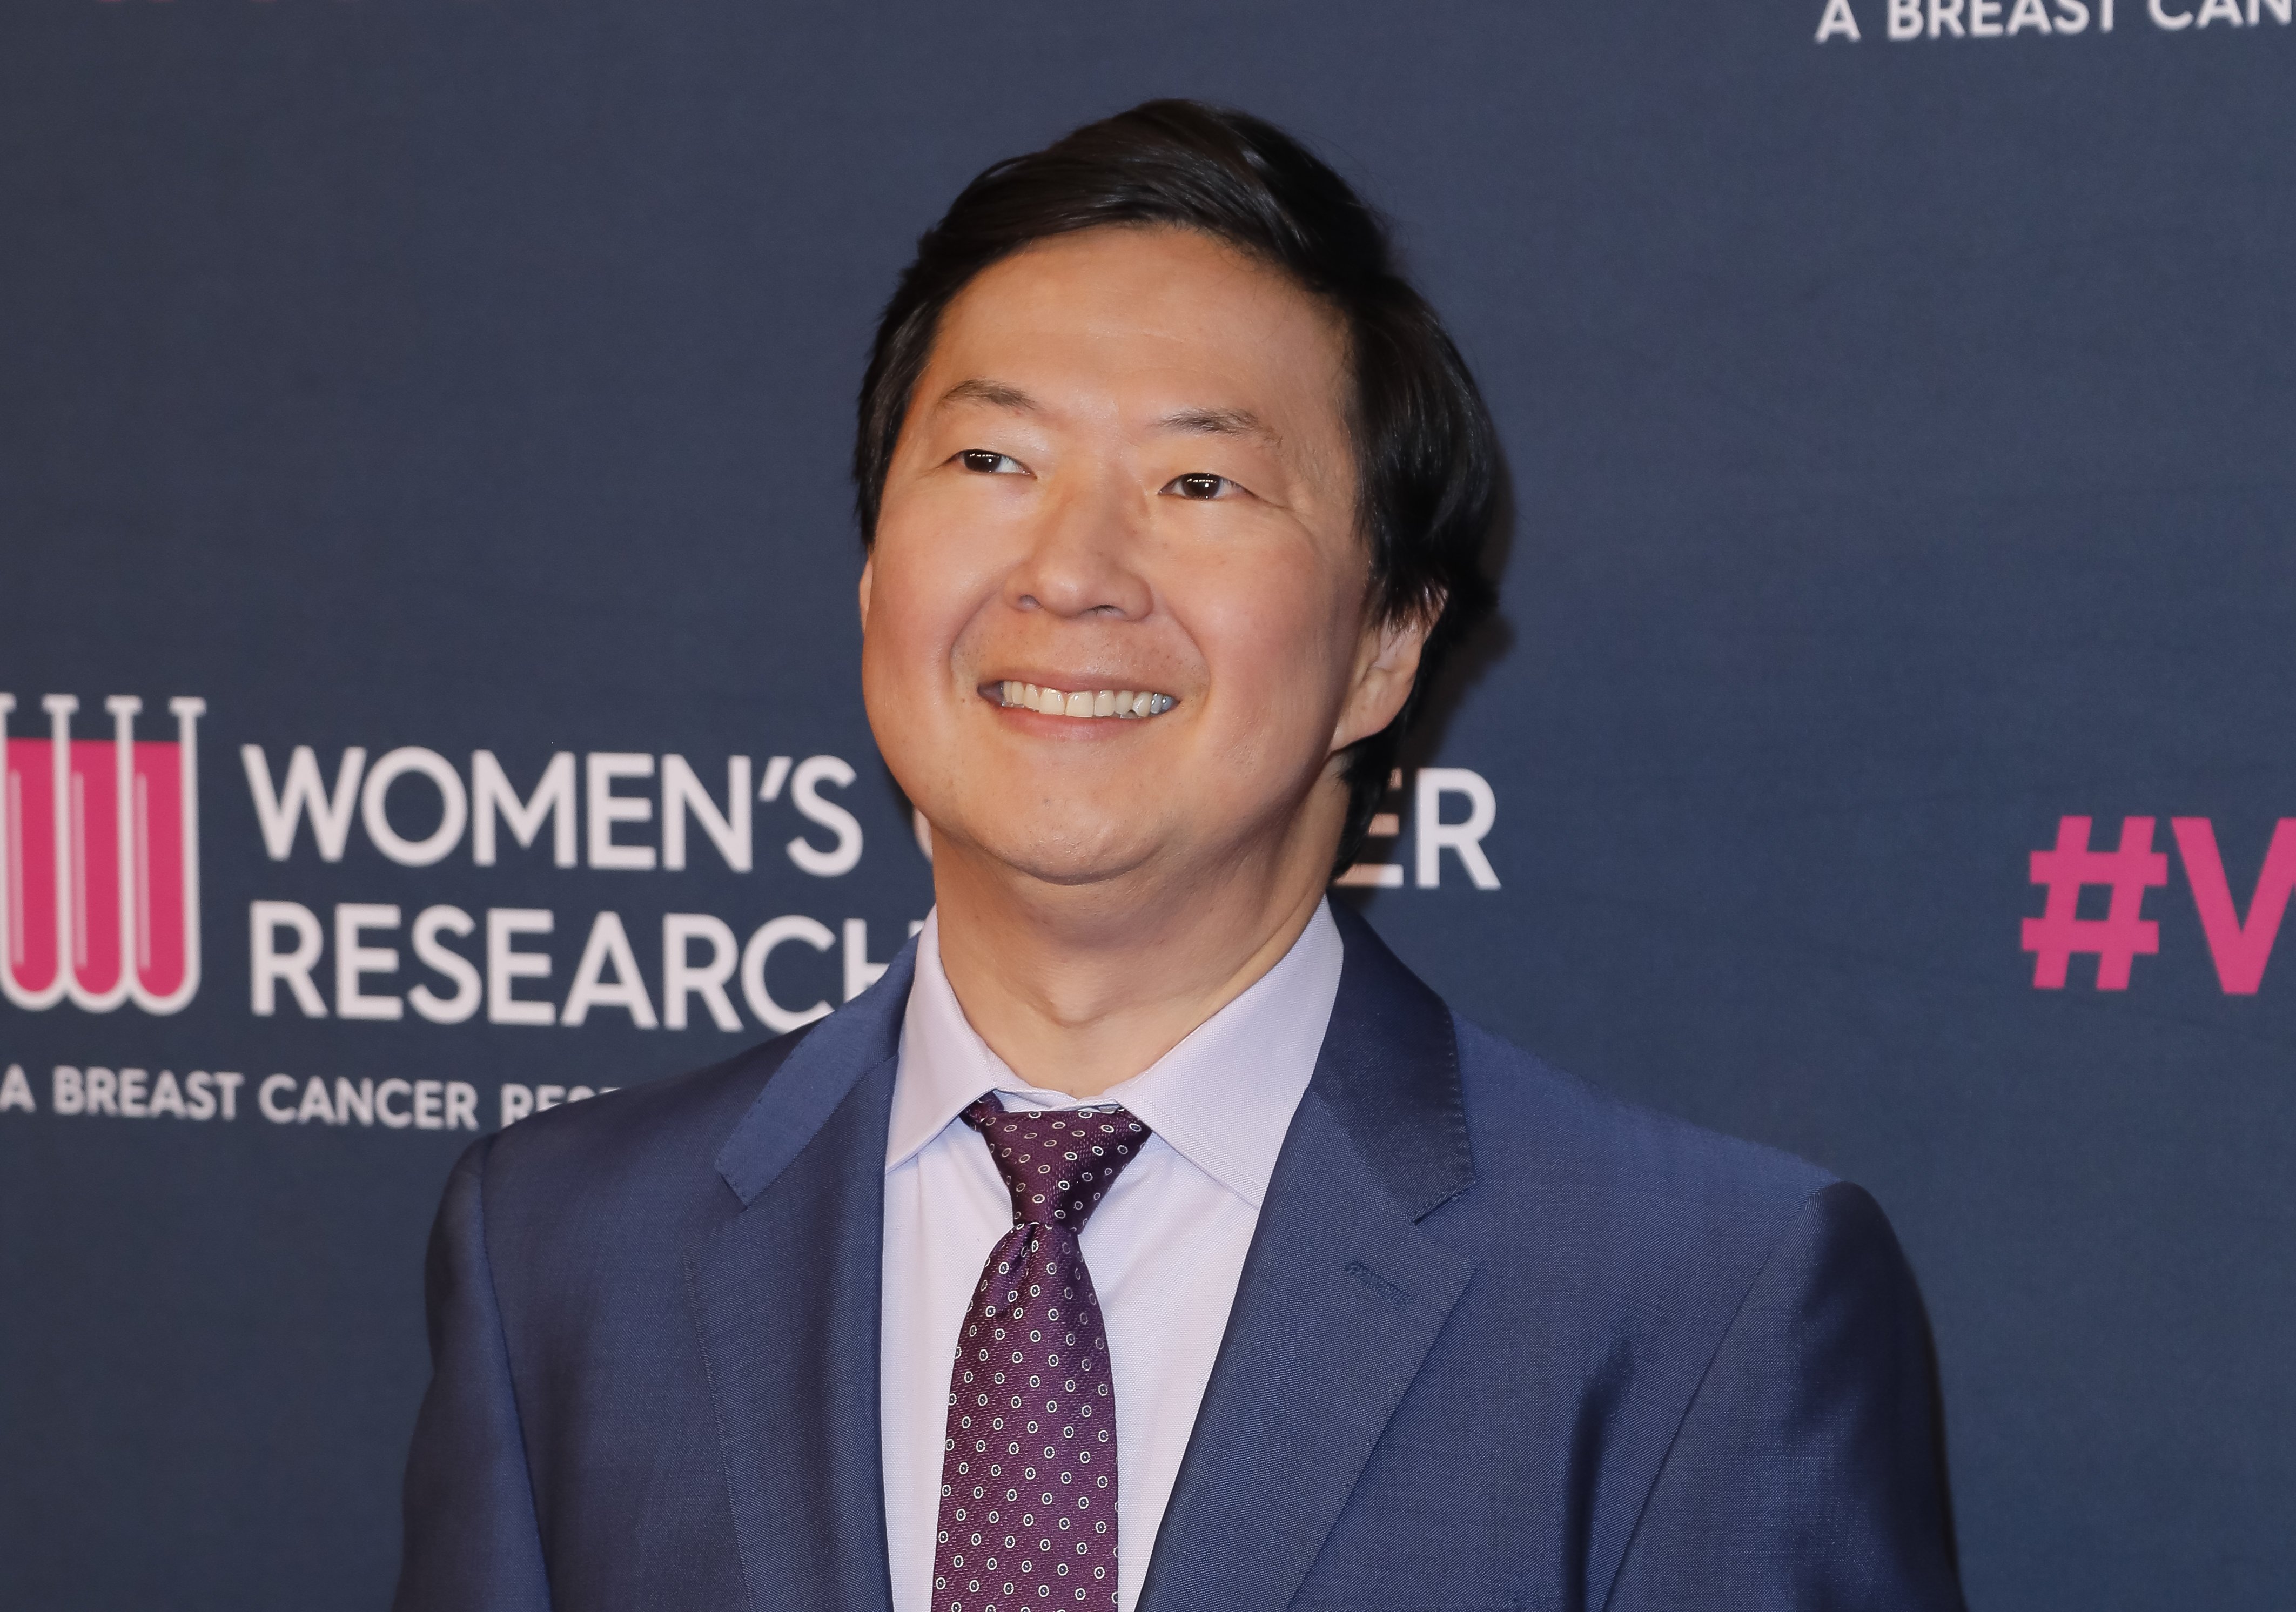 Ken Jeong attends the Unforgettable Evening 2020 in Beverly Hills, California on February 27, 2020 | Photo: Getty Images